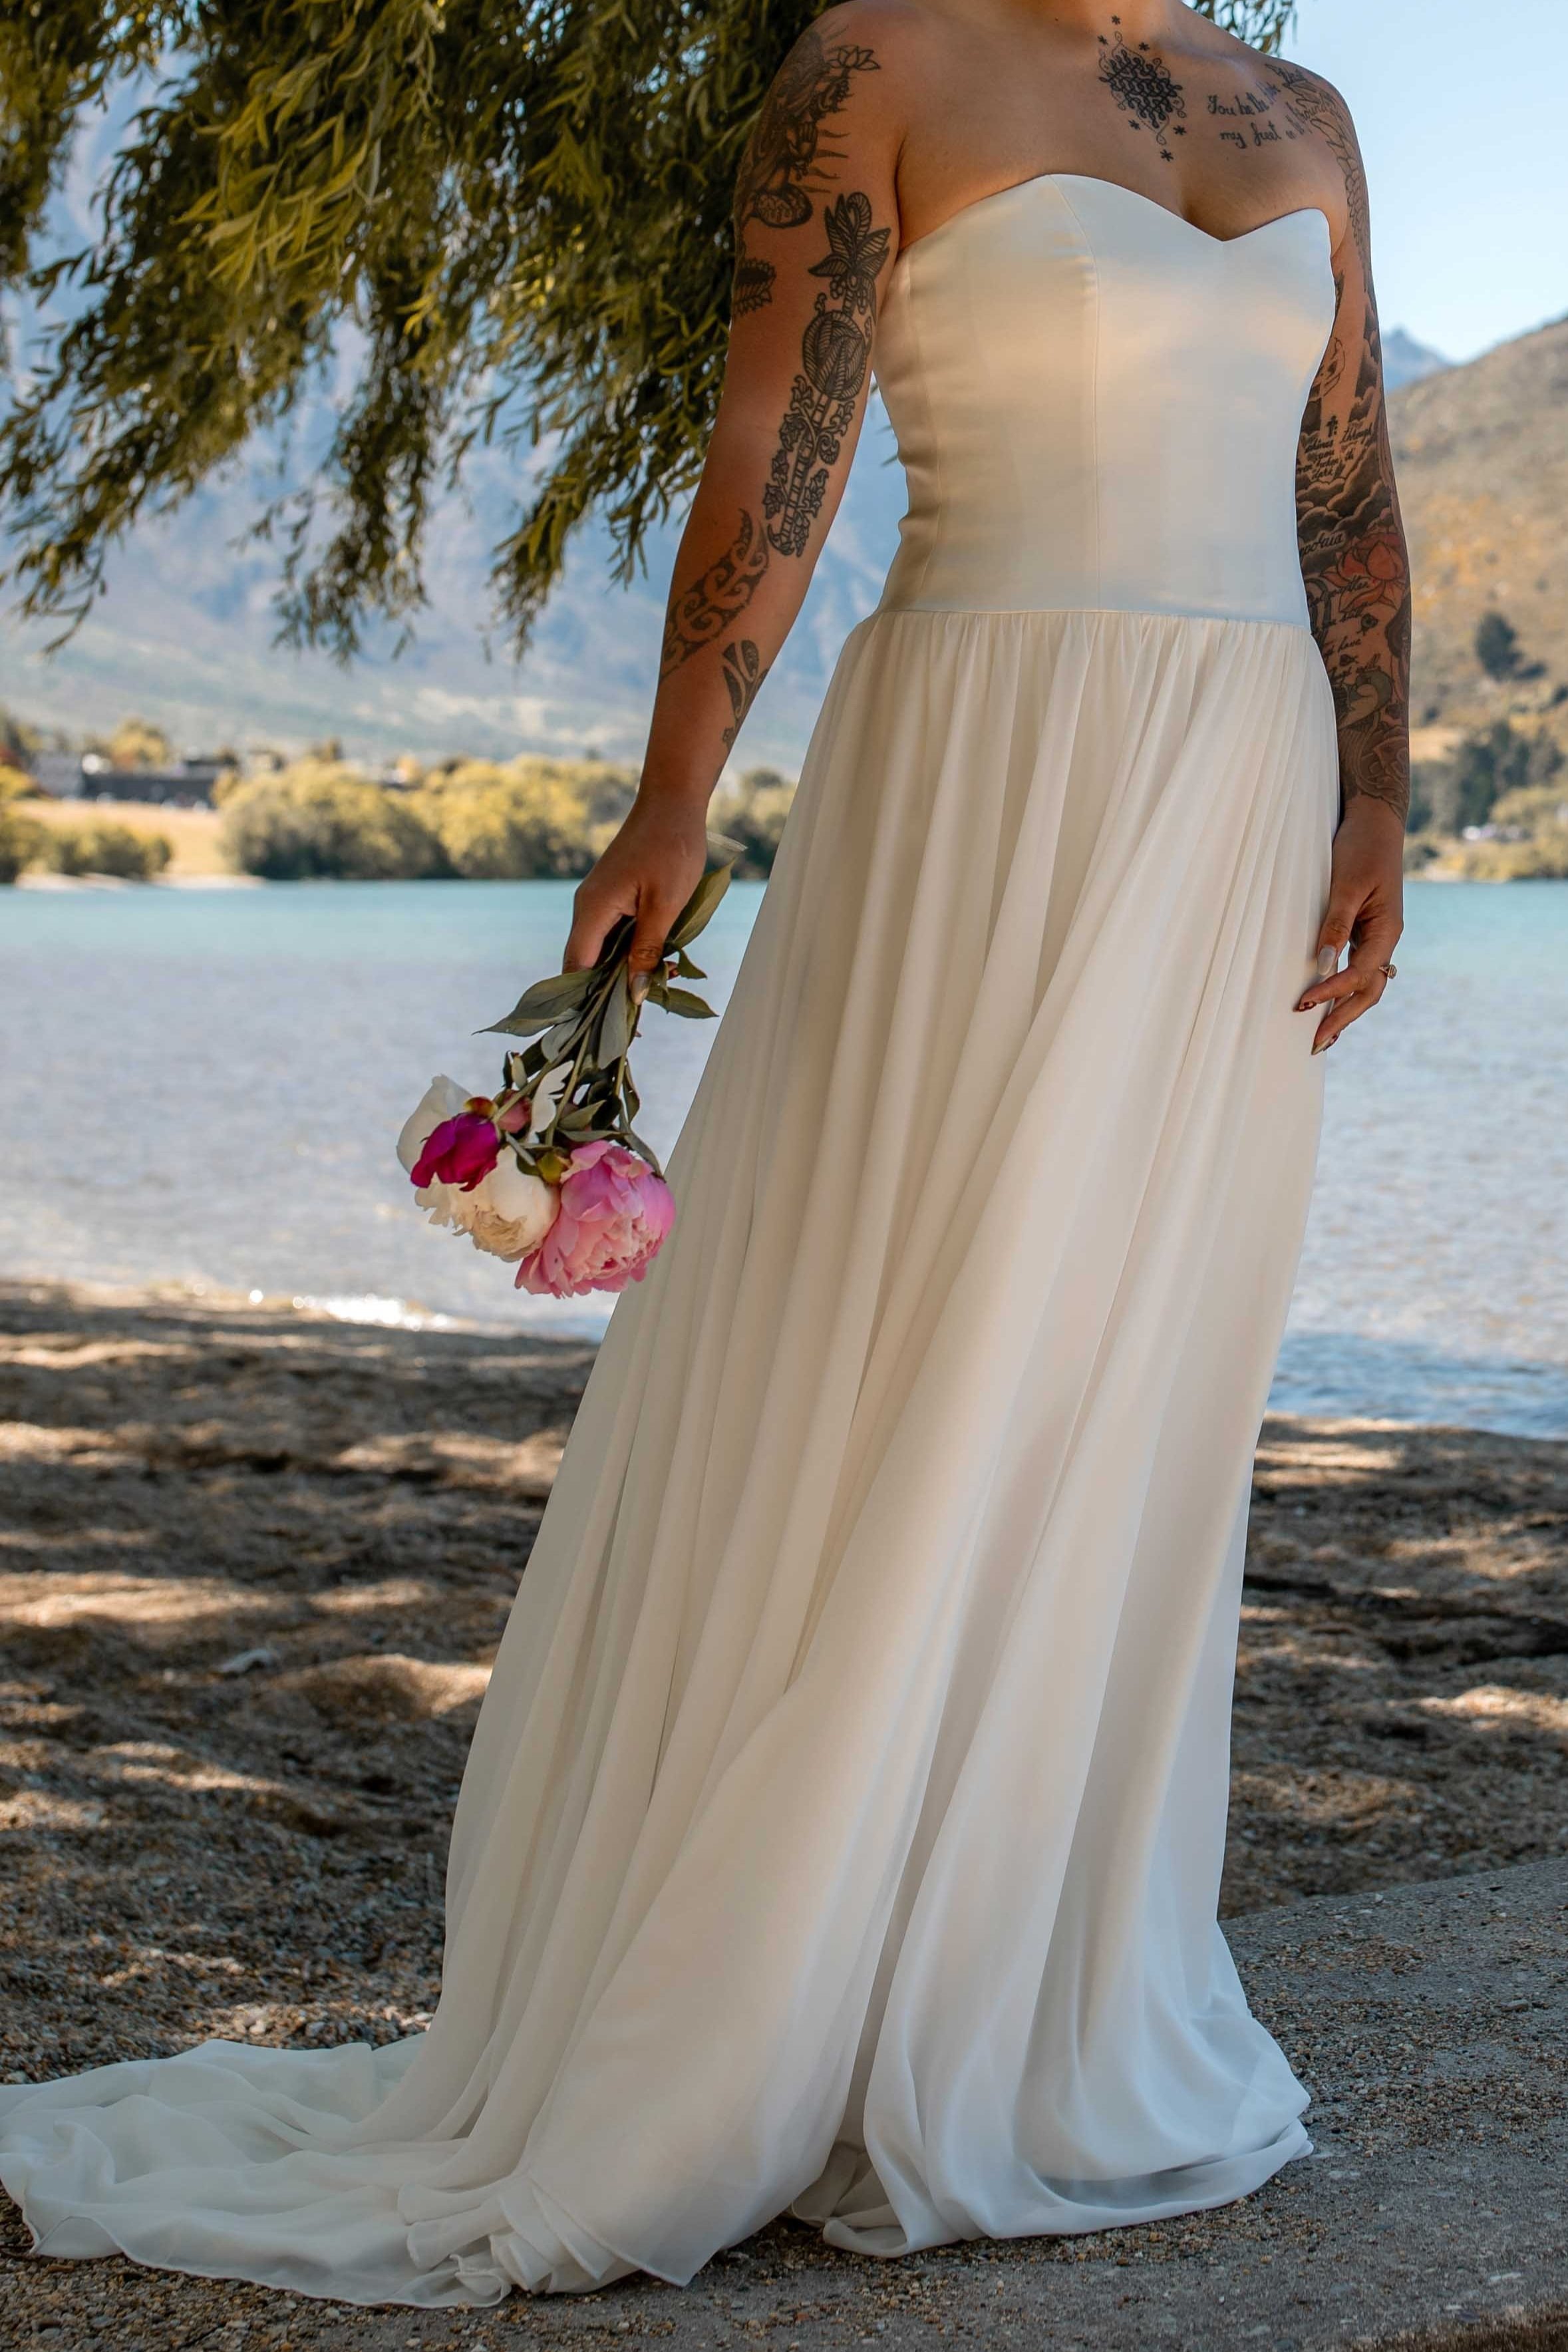 Charlotte+Dress+-+Nemo+Bridal+Couture+Queenstown+New+Zealand+0V9A3295.jpg